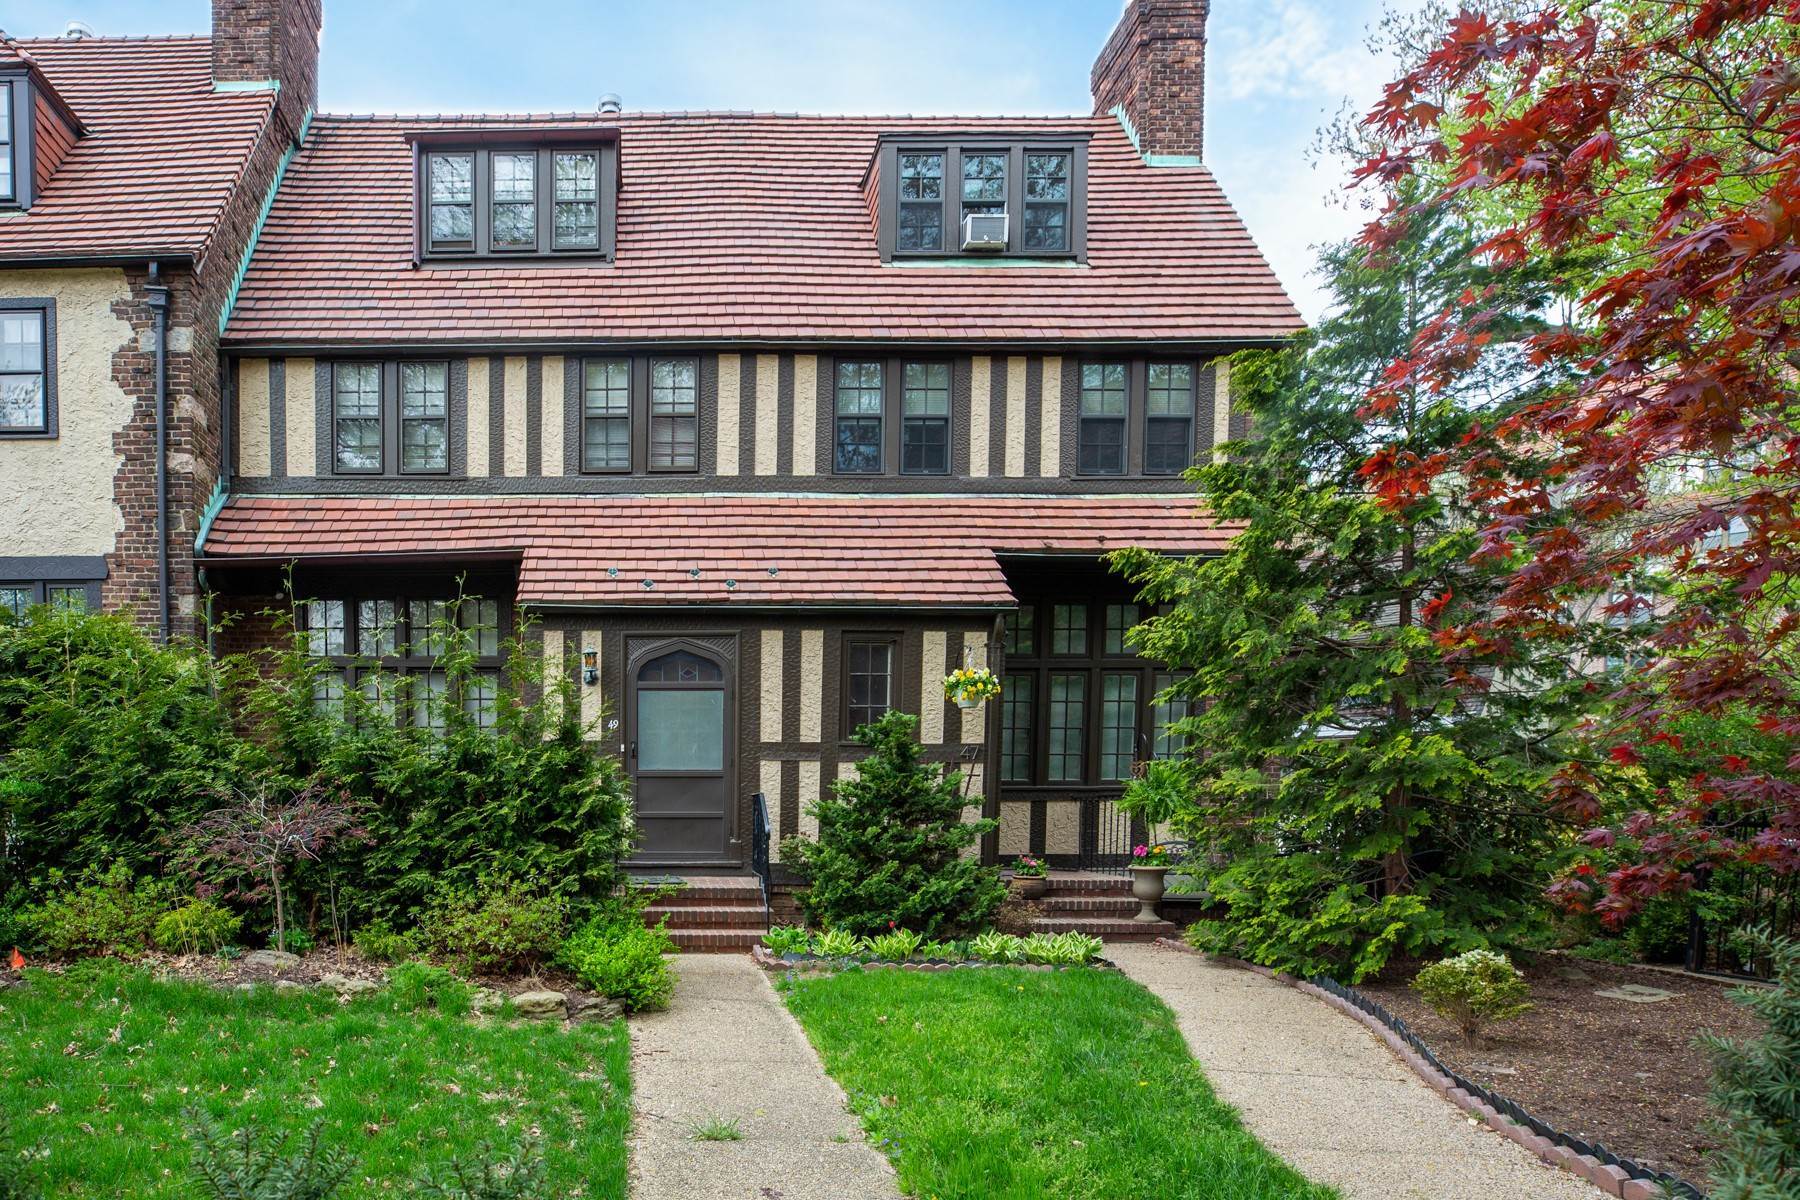 Single Family Homes for Sale at ‘FOREST HILLS GARDENS' WORK OF ART’ 47 Continental Avenue, Forest Hills Gardens, Forest Hills, New York 11375 United States